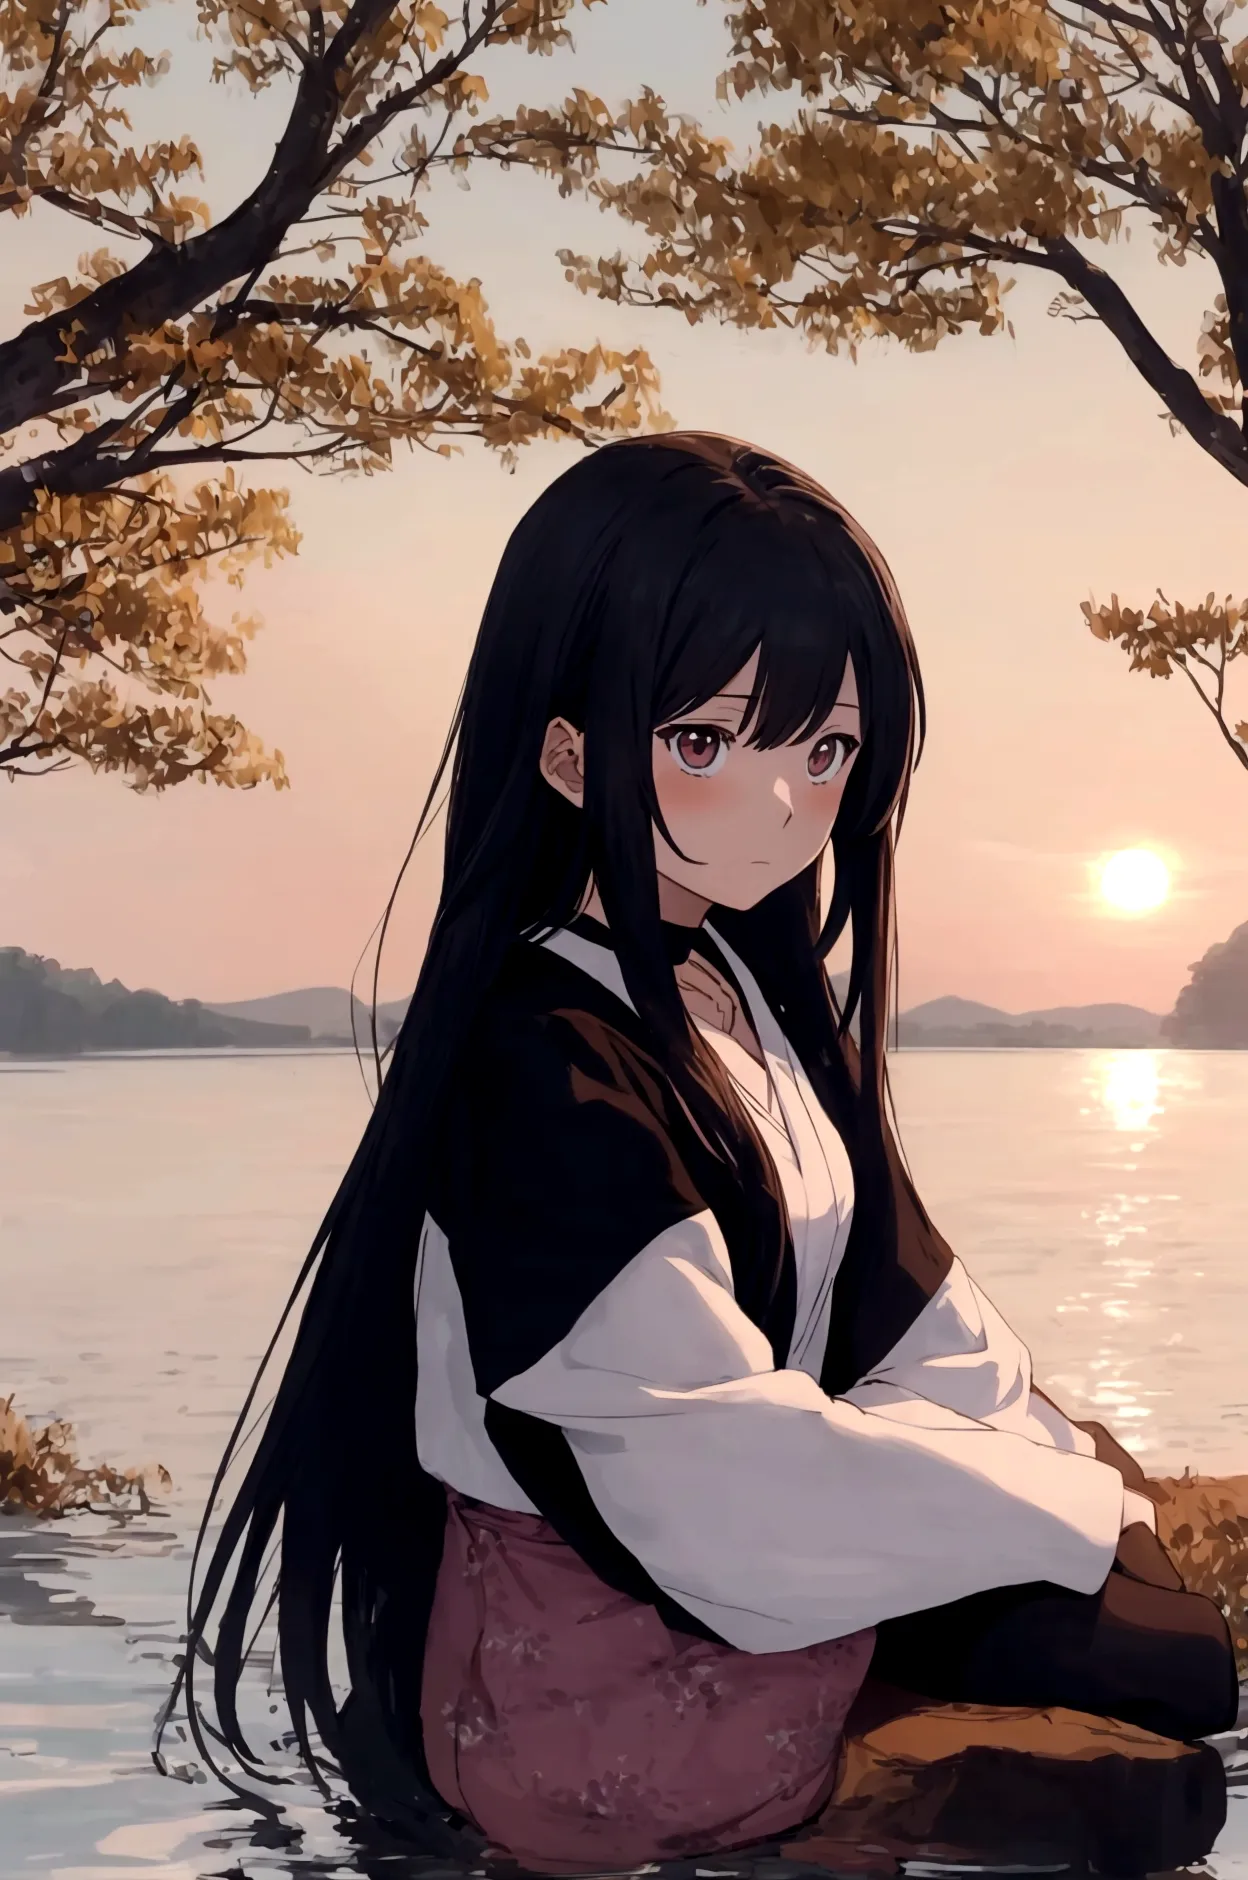 Draw an image of a female anime character sitting alone by a lake at sunset, with a facial expression that reflects both sadness...